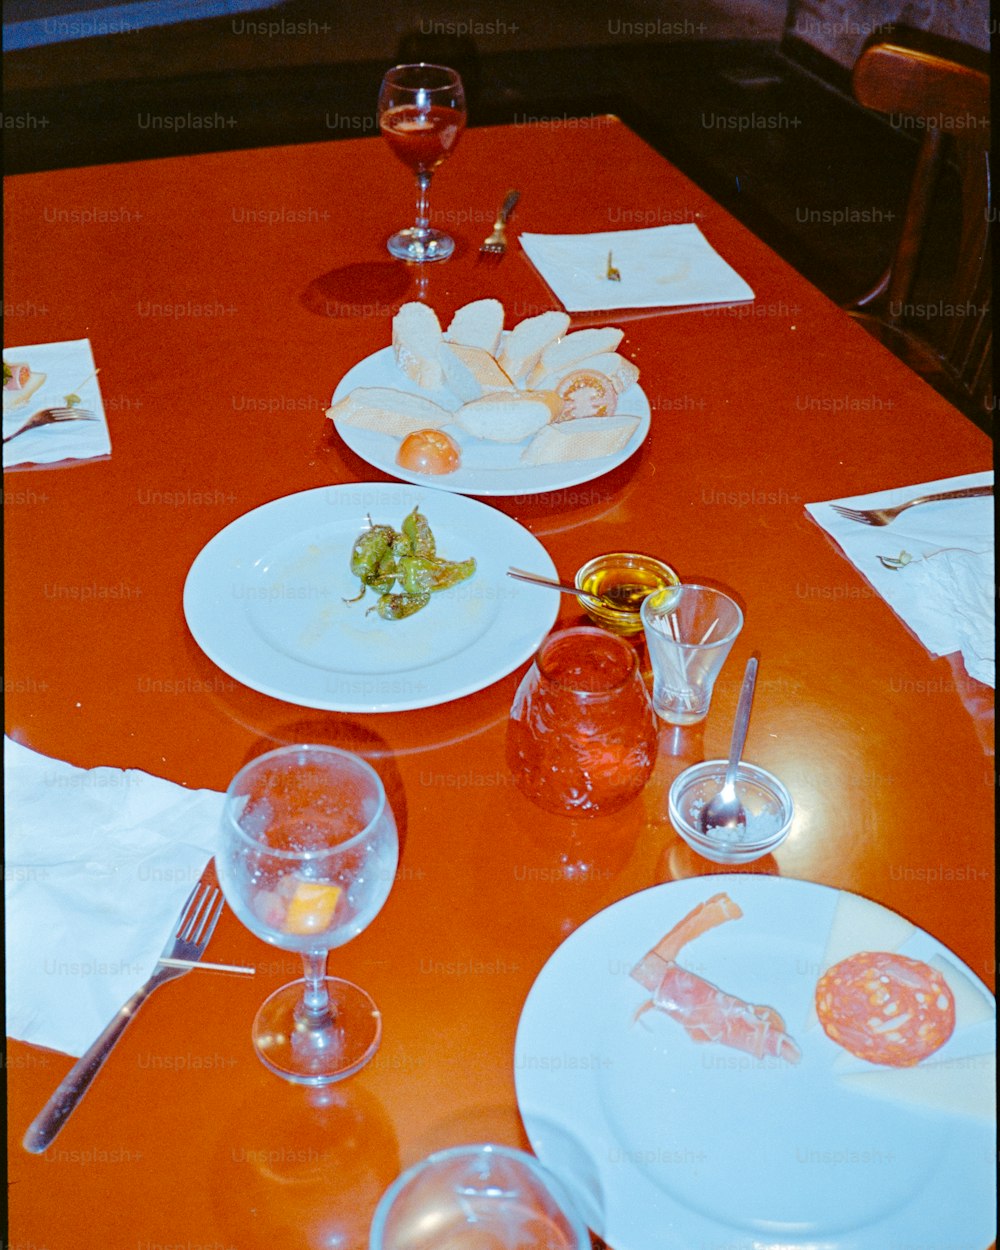 a table with plates, glasses, and utensils on it